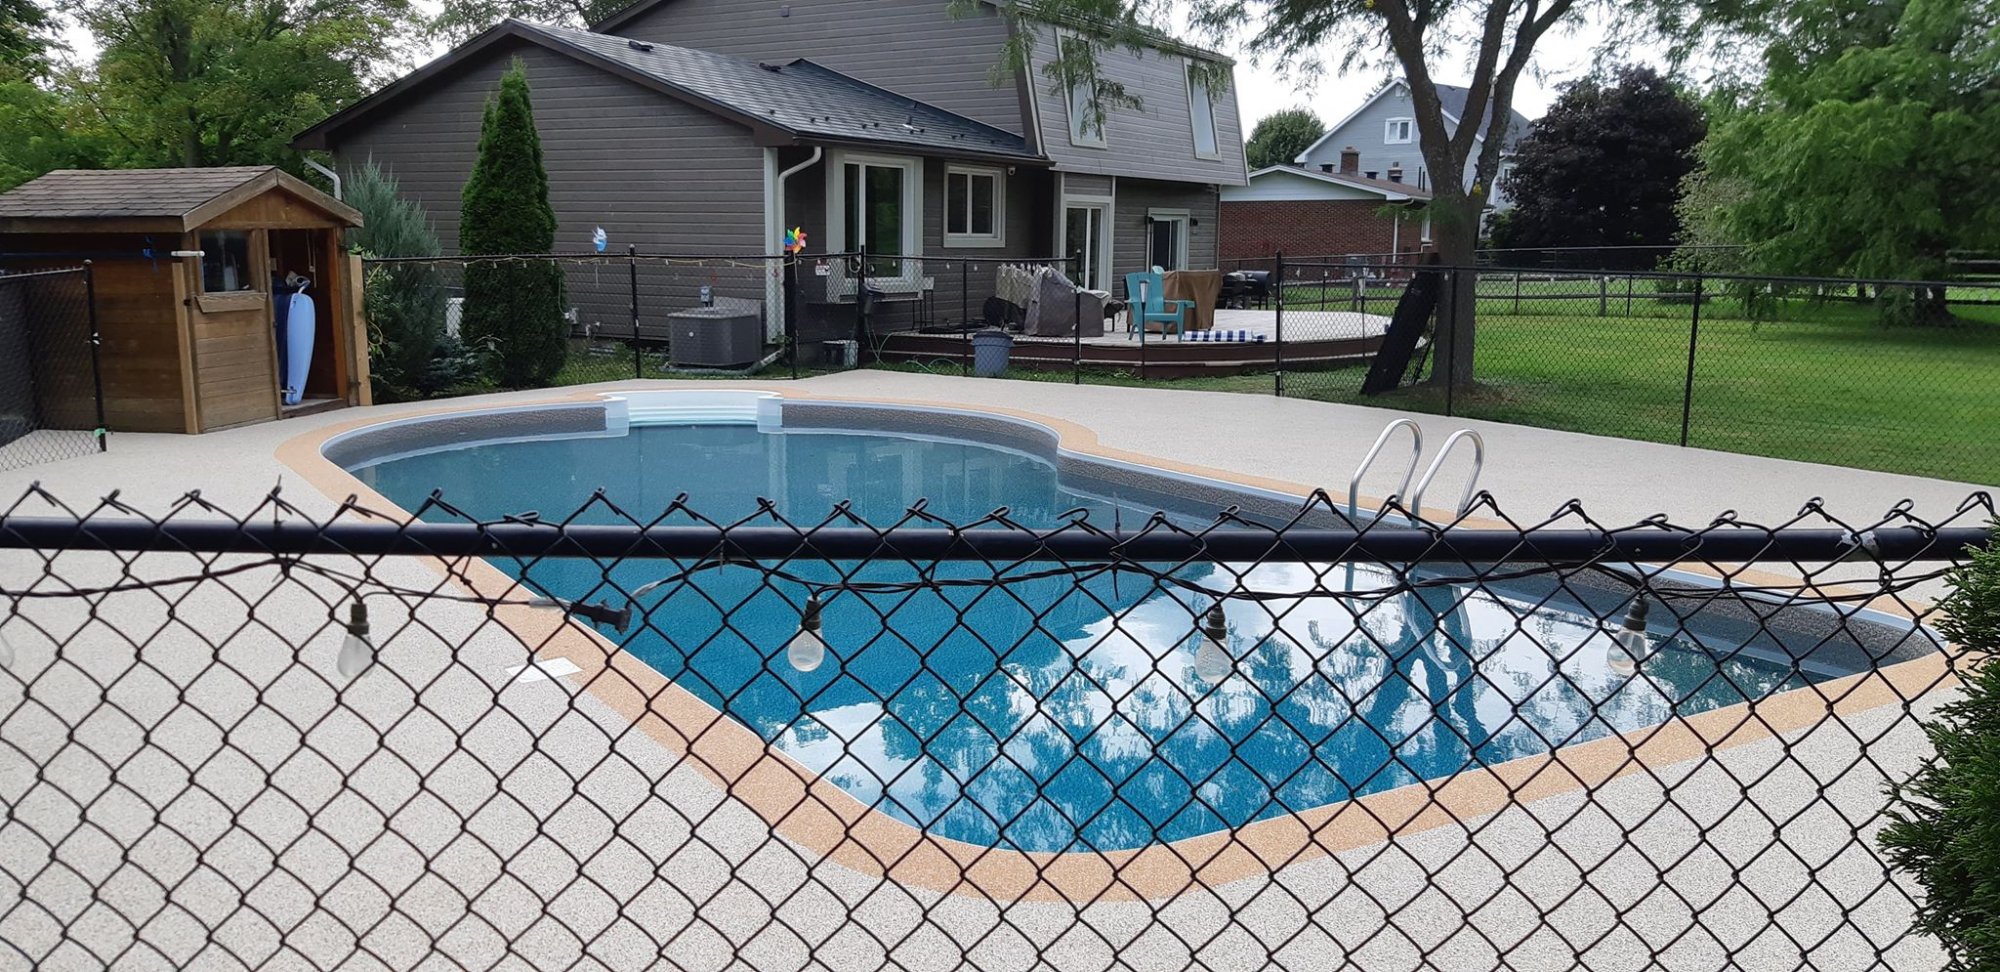 Pool with new deck.jpg